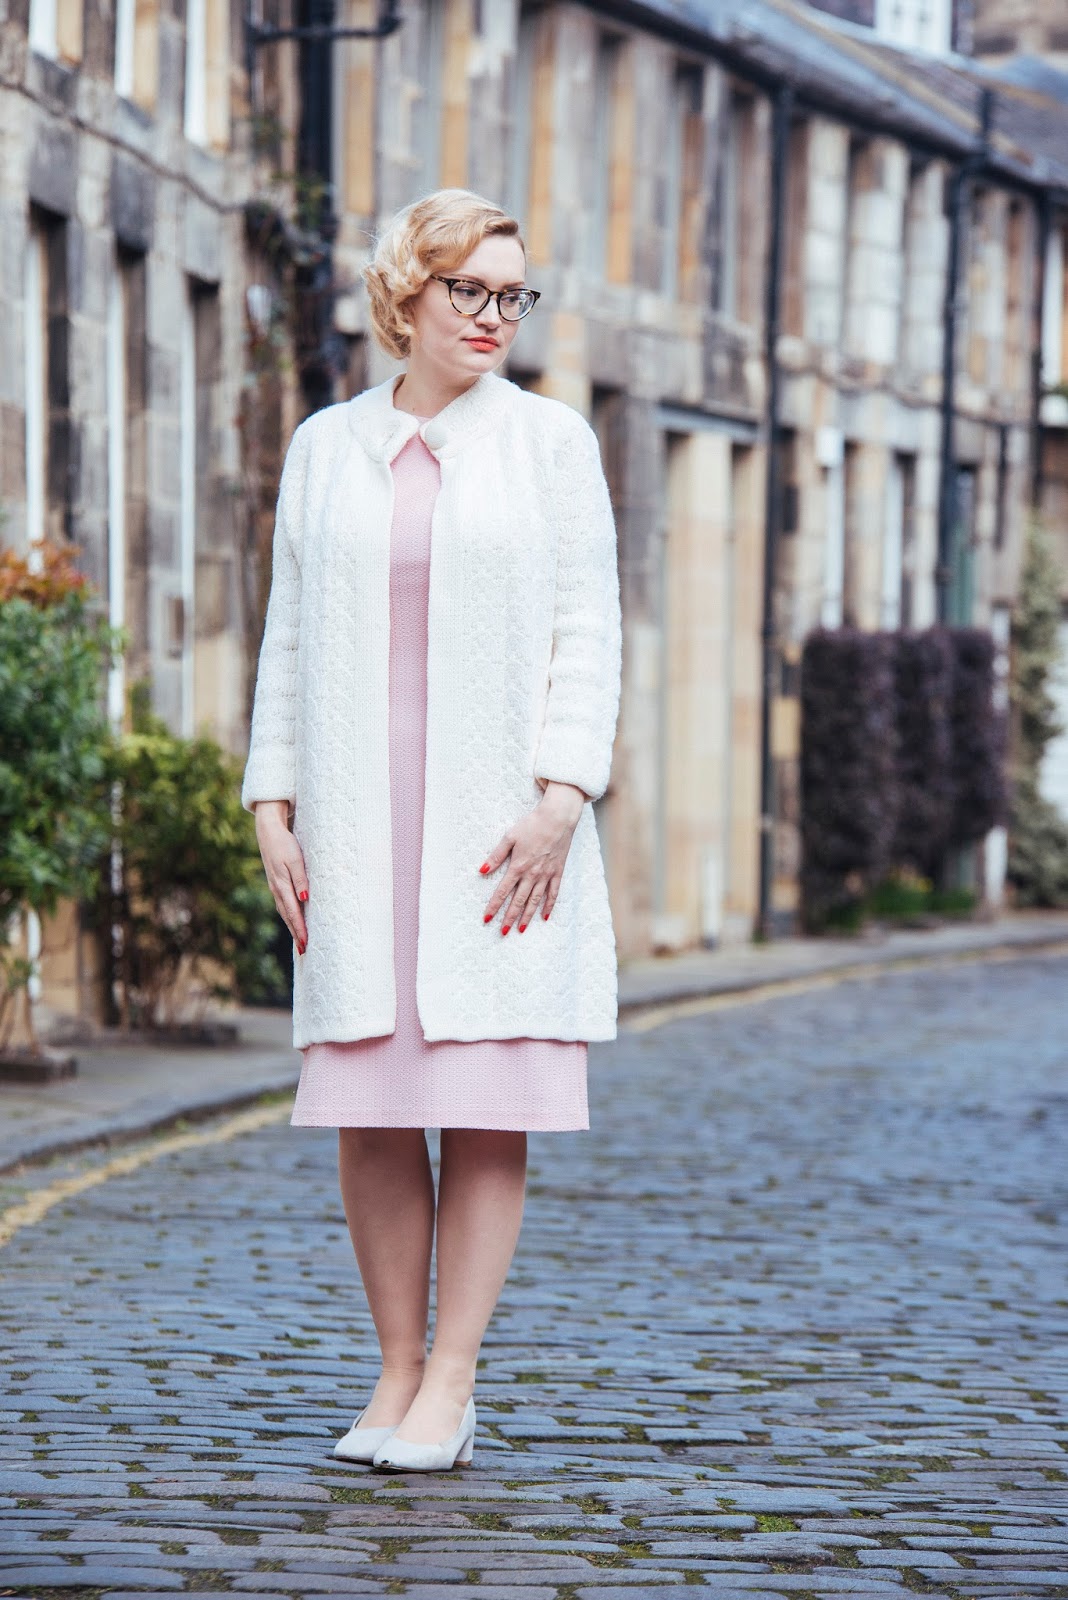 Washington Gwande photography, Fashion blogger wardrobe conversations in vintage 1960s coat and dress in edinburgh, circus lane photoshoot location, thunderbird penelope outfit, pink knit dress, #30wear campaign, caring for vintage clothes, sustainable fashion, ethical fashion, getting wear out of your clothes, thoughtful fashion